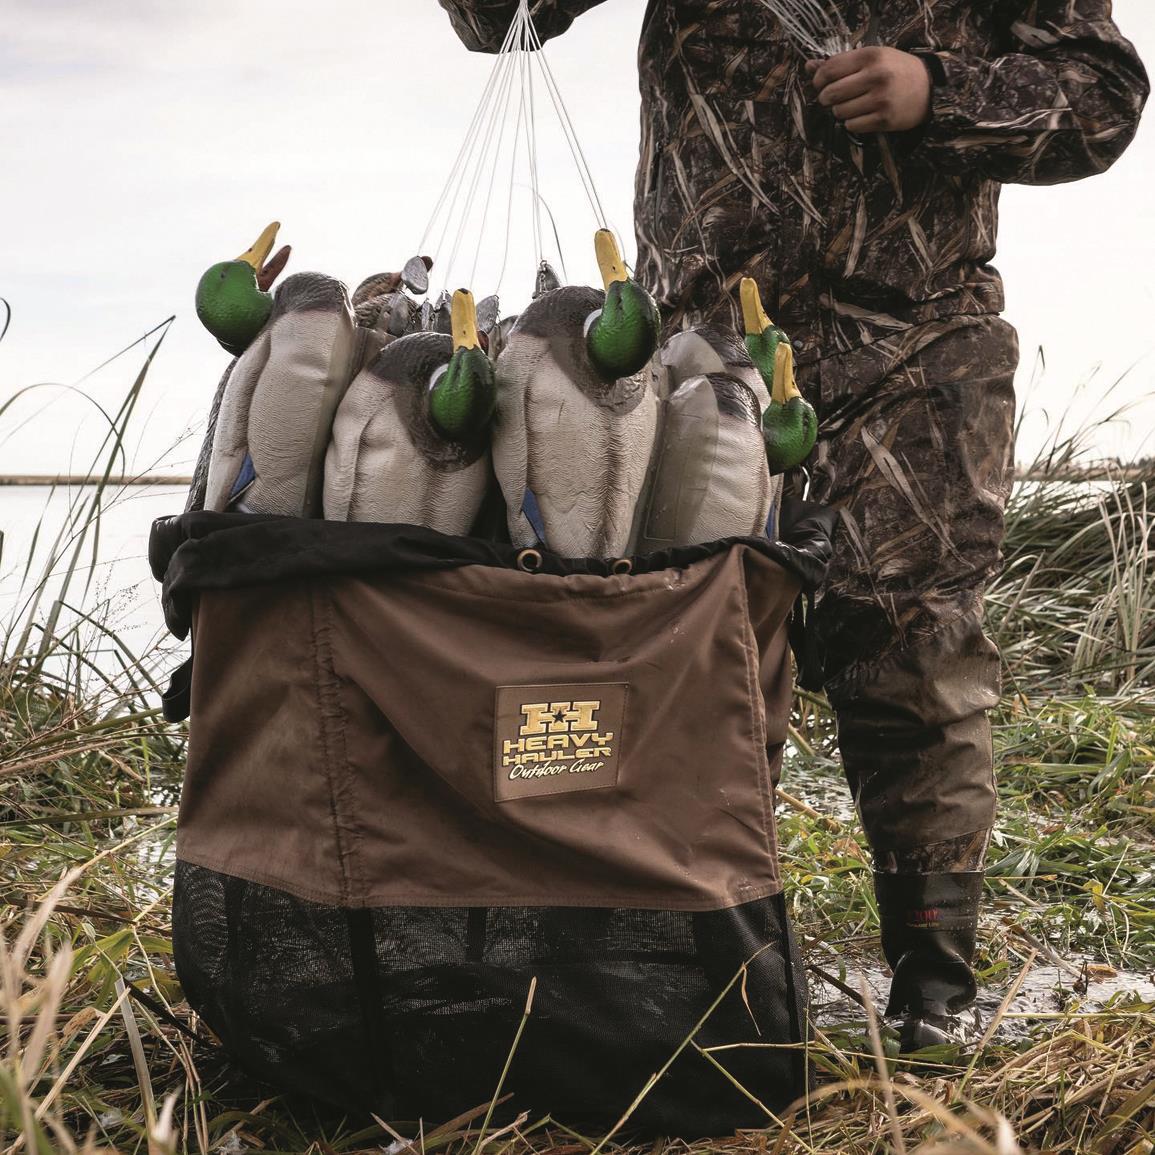 STANDS UP STAYS OPEN  BACK PACK STRAPS TRANSPORTS 30 DECOYS NEW DUCK DECOY BAG 